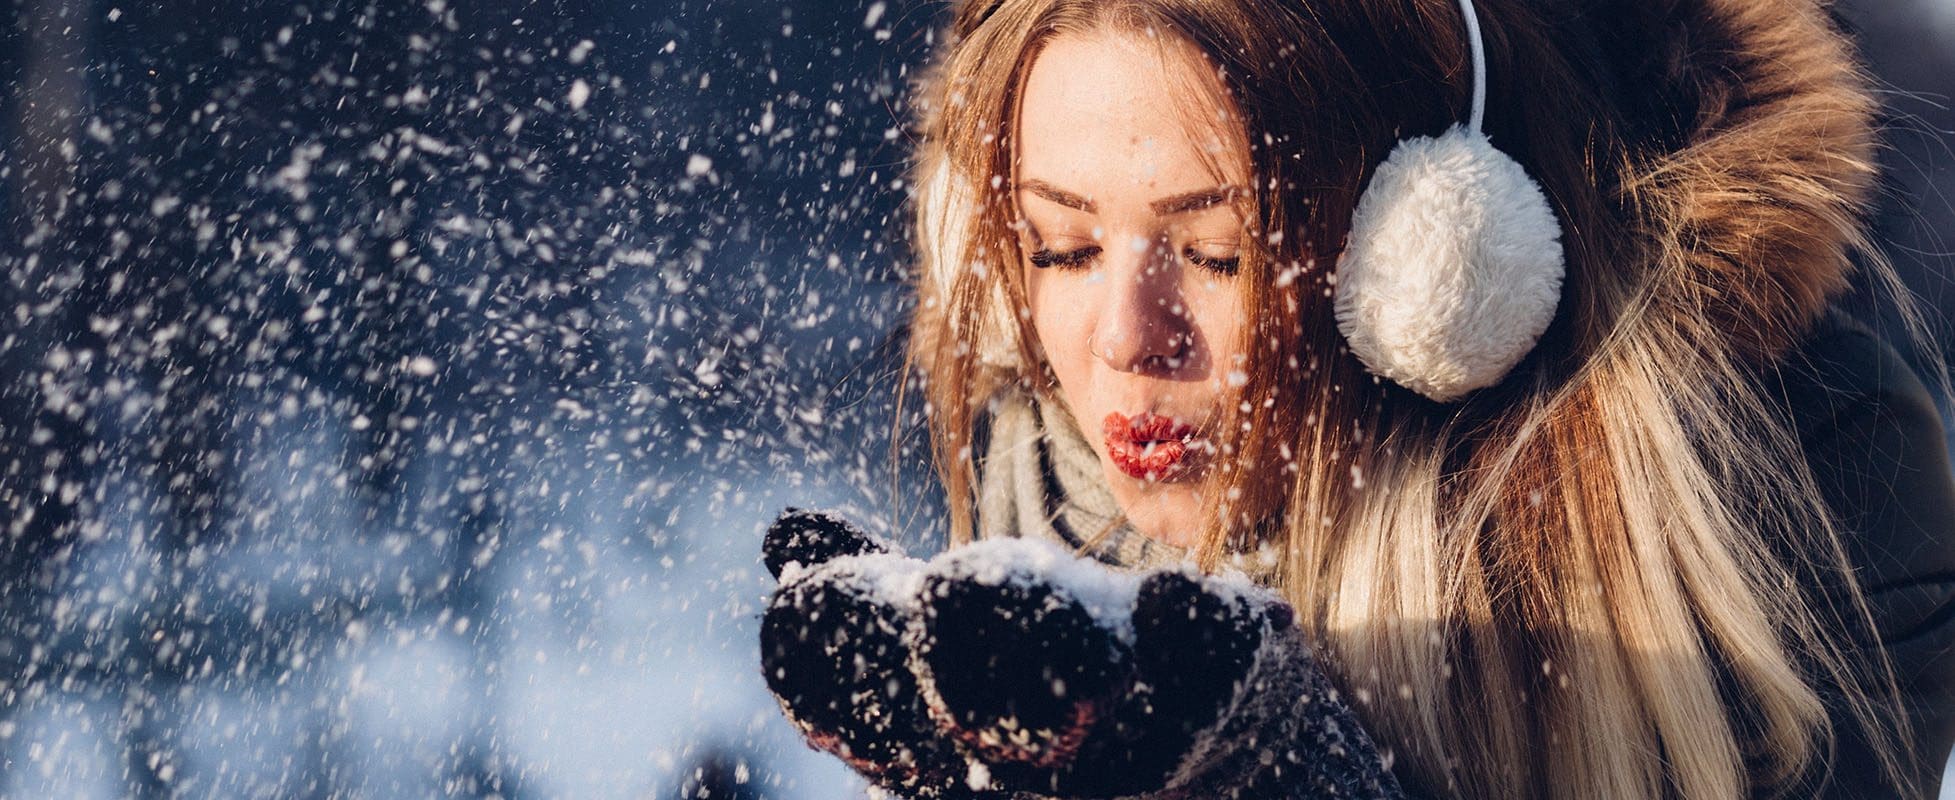 woman blowing snow in the air